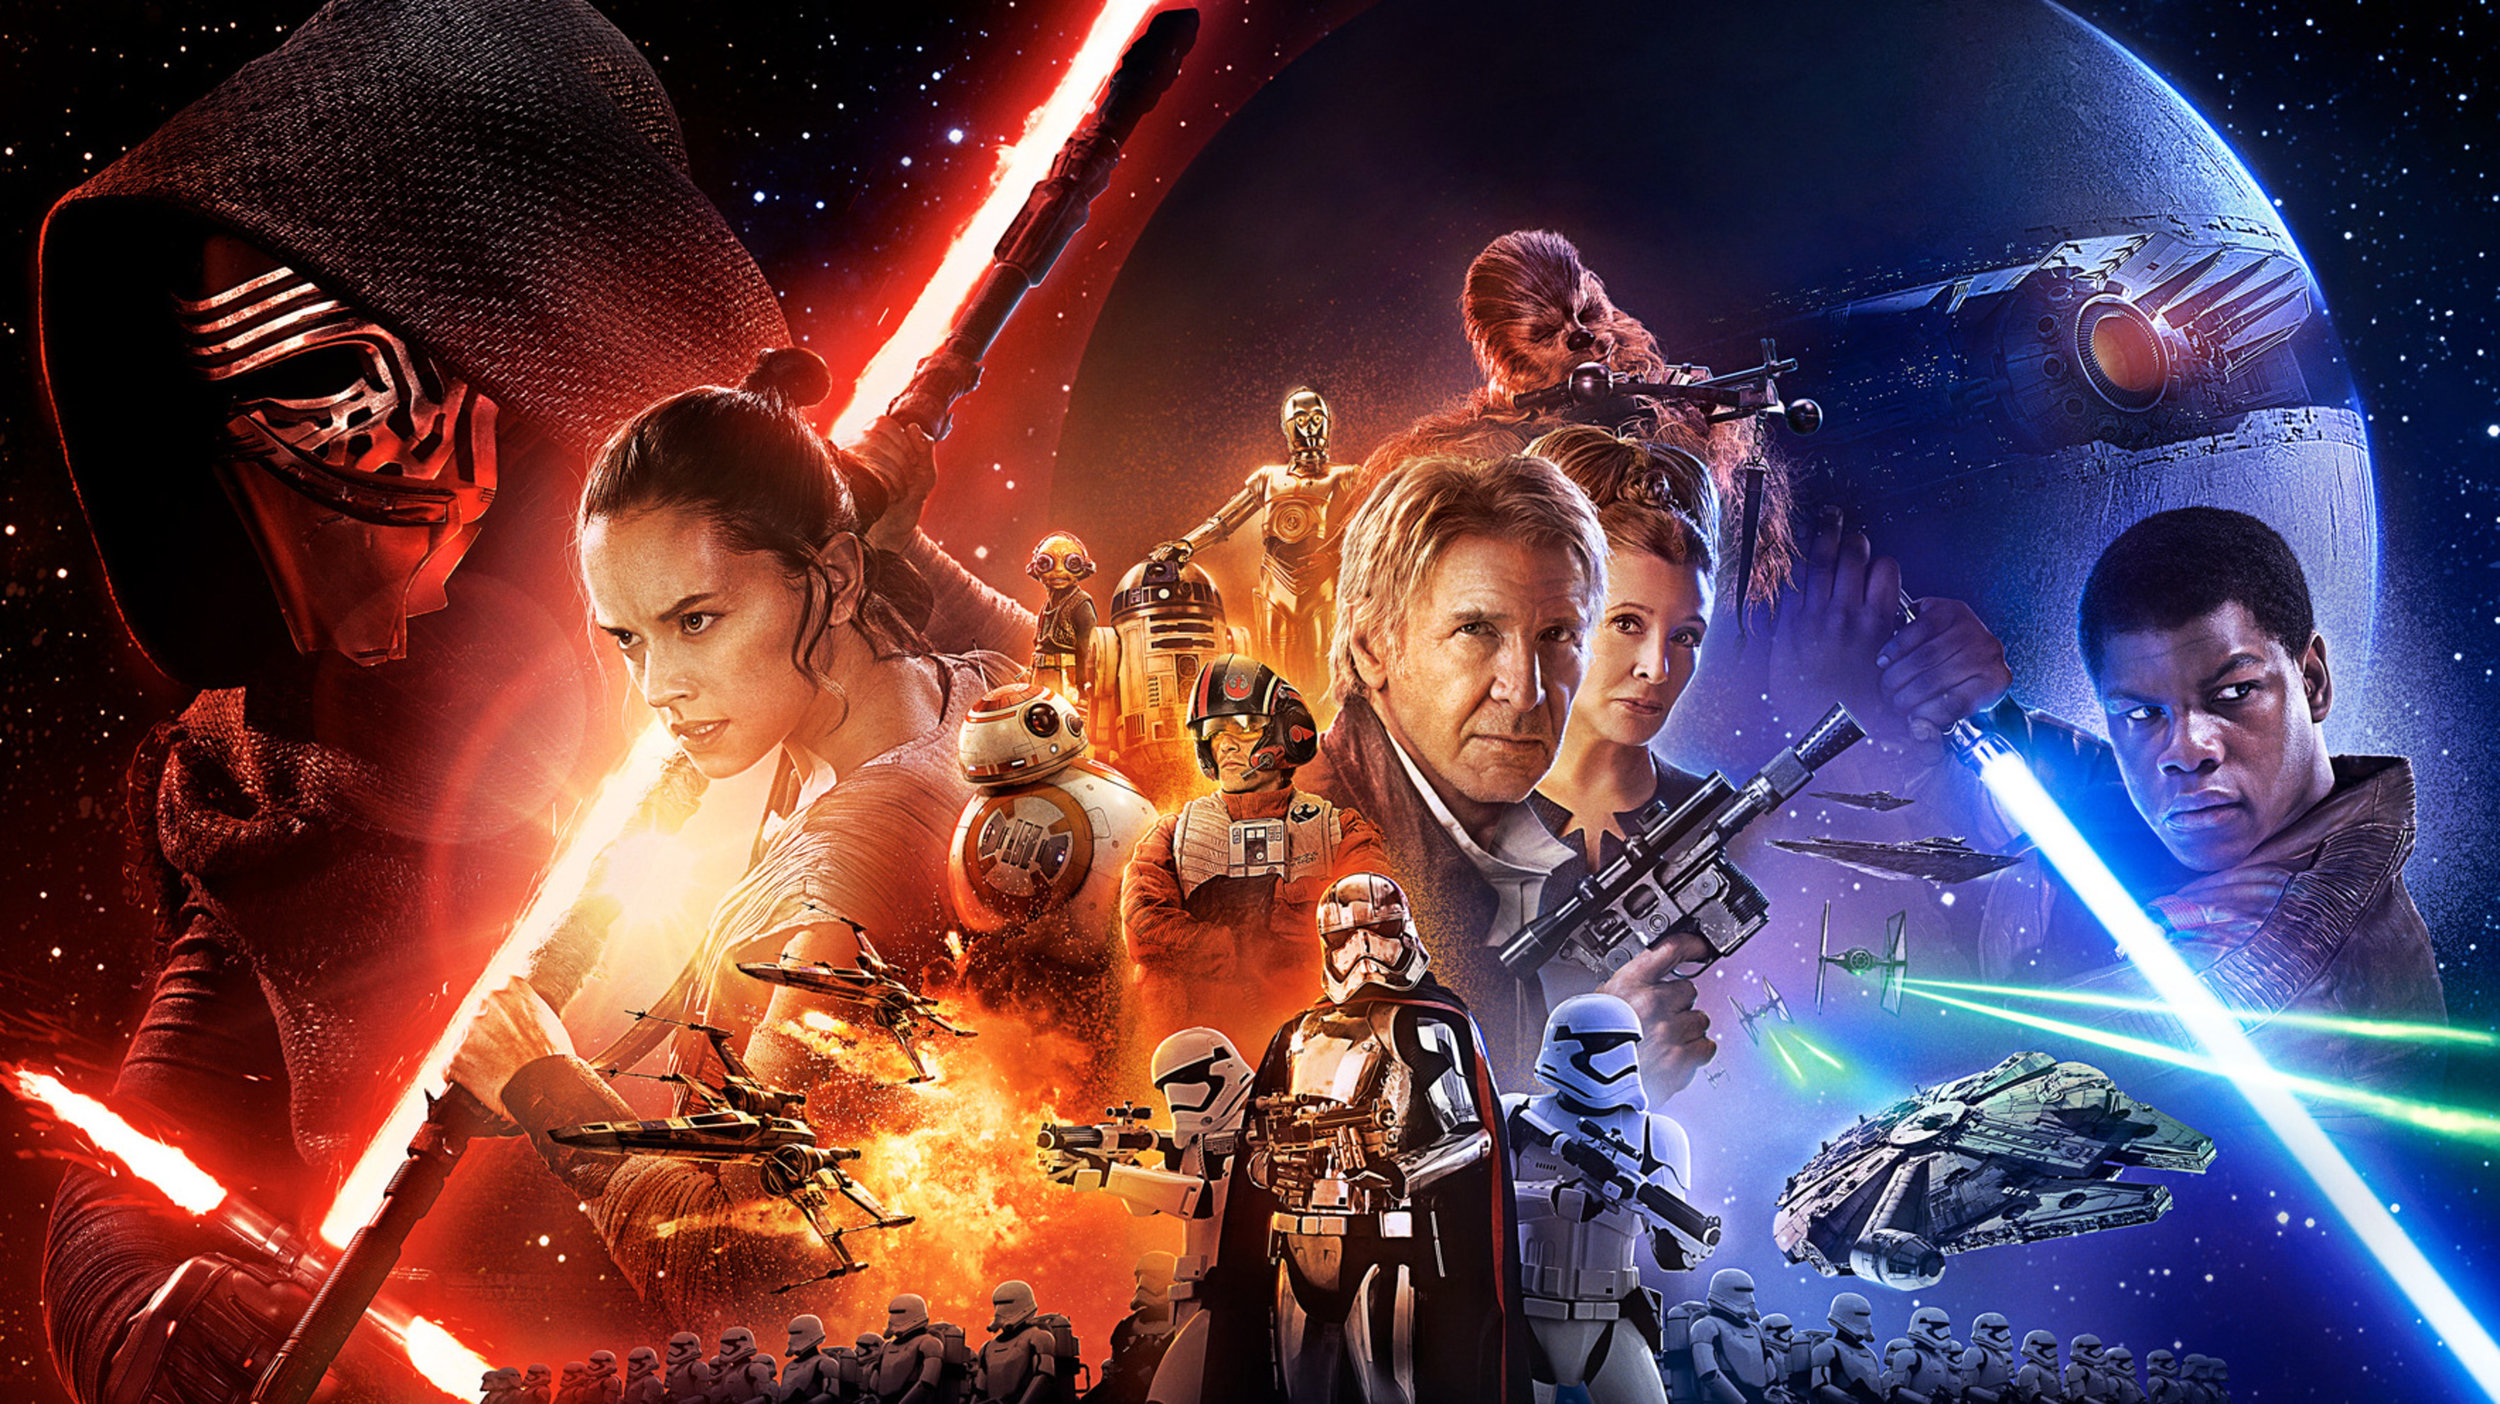 Star Wars: The Force Awakens (2015) — Movies & Meaning